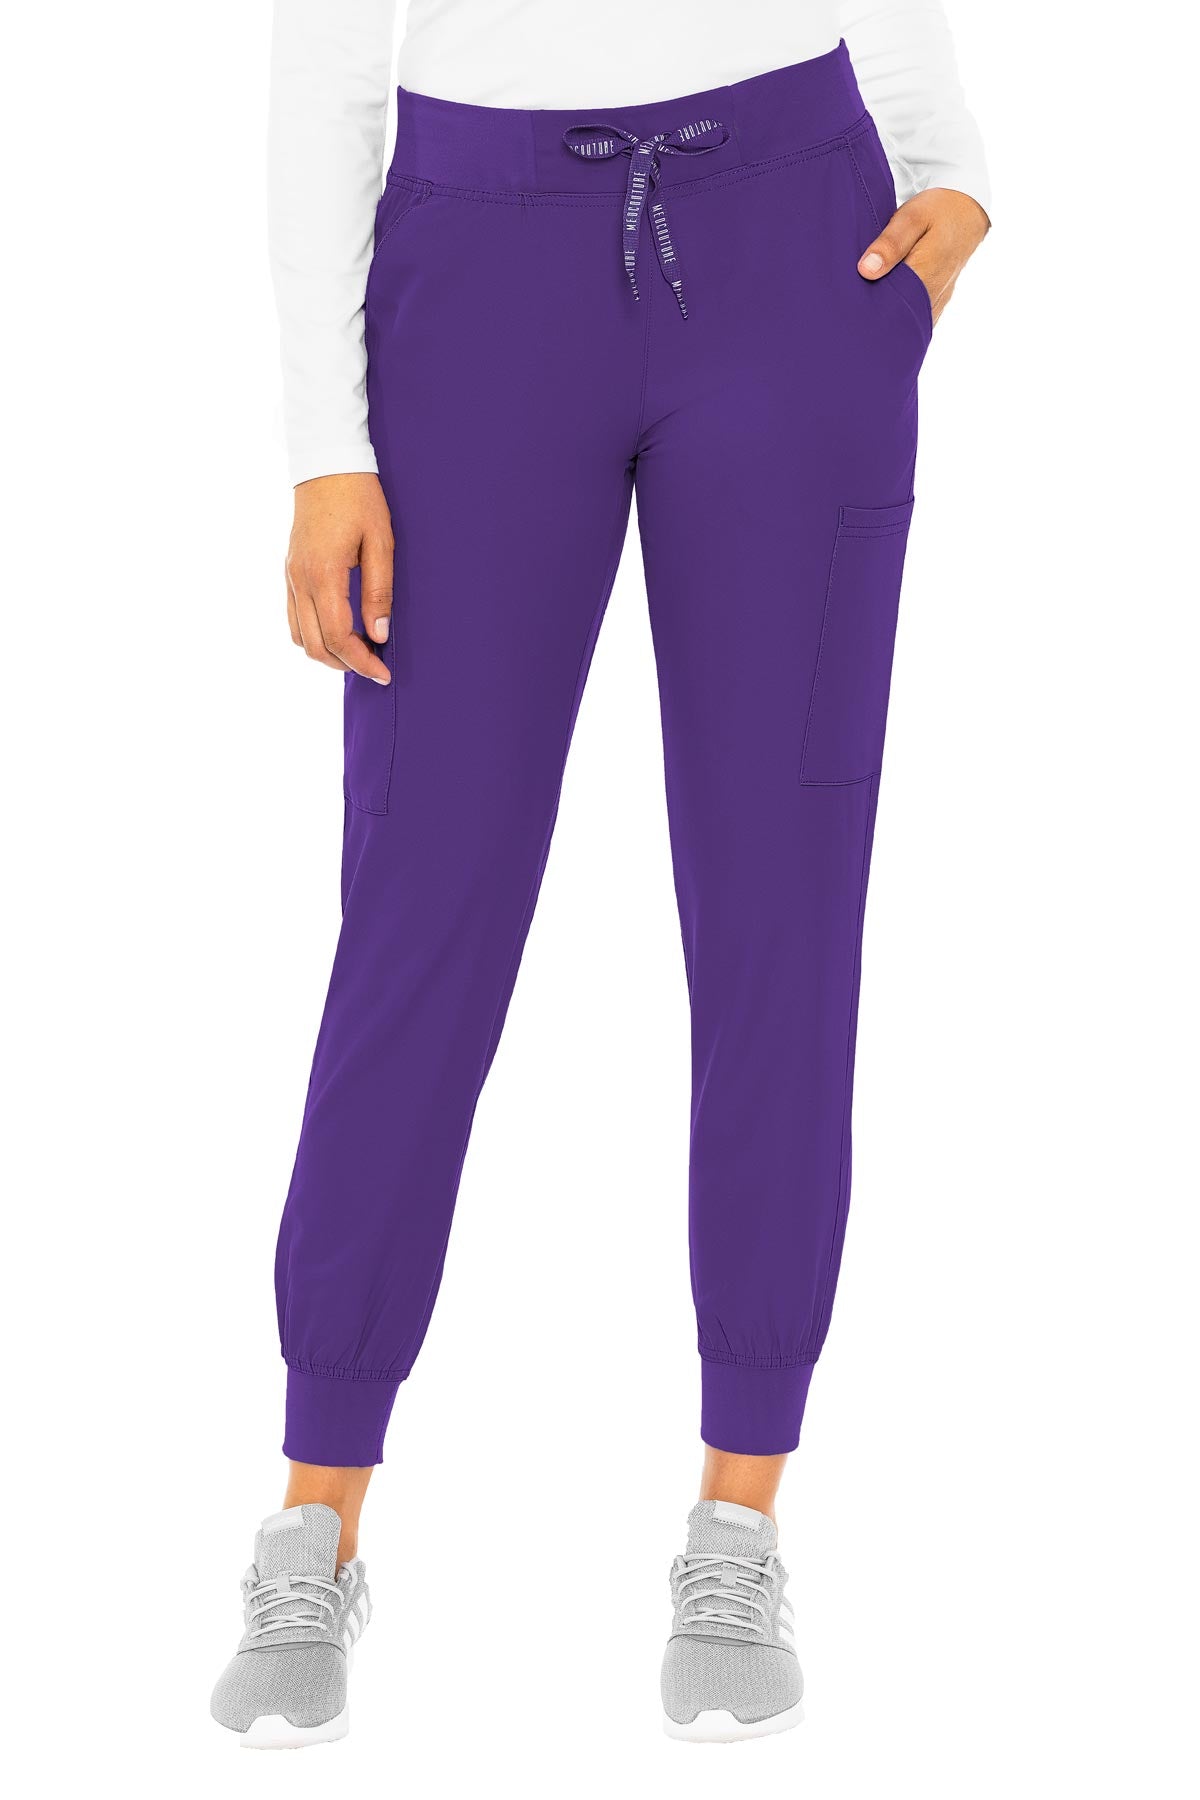 Med Couture Grape PANT